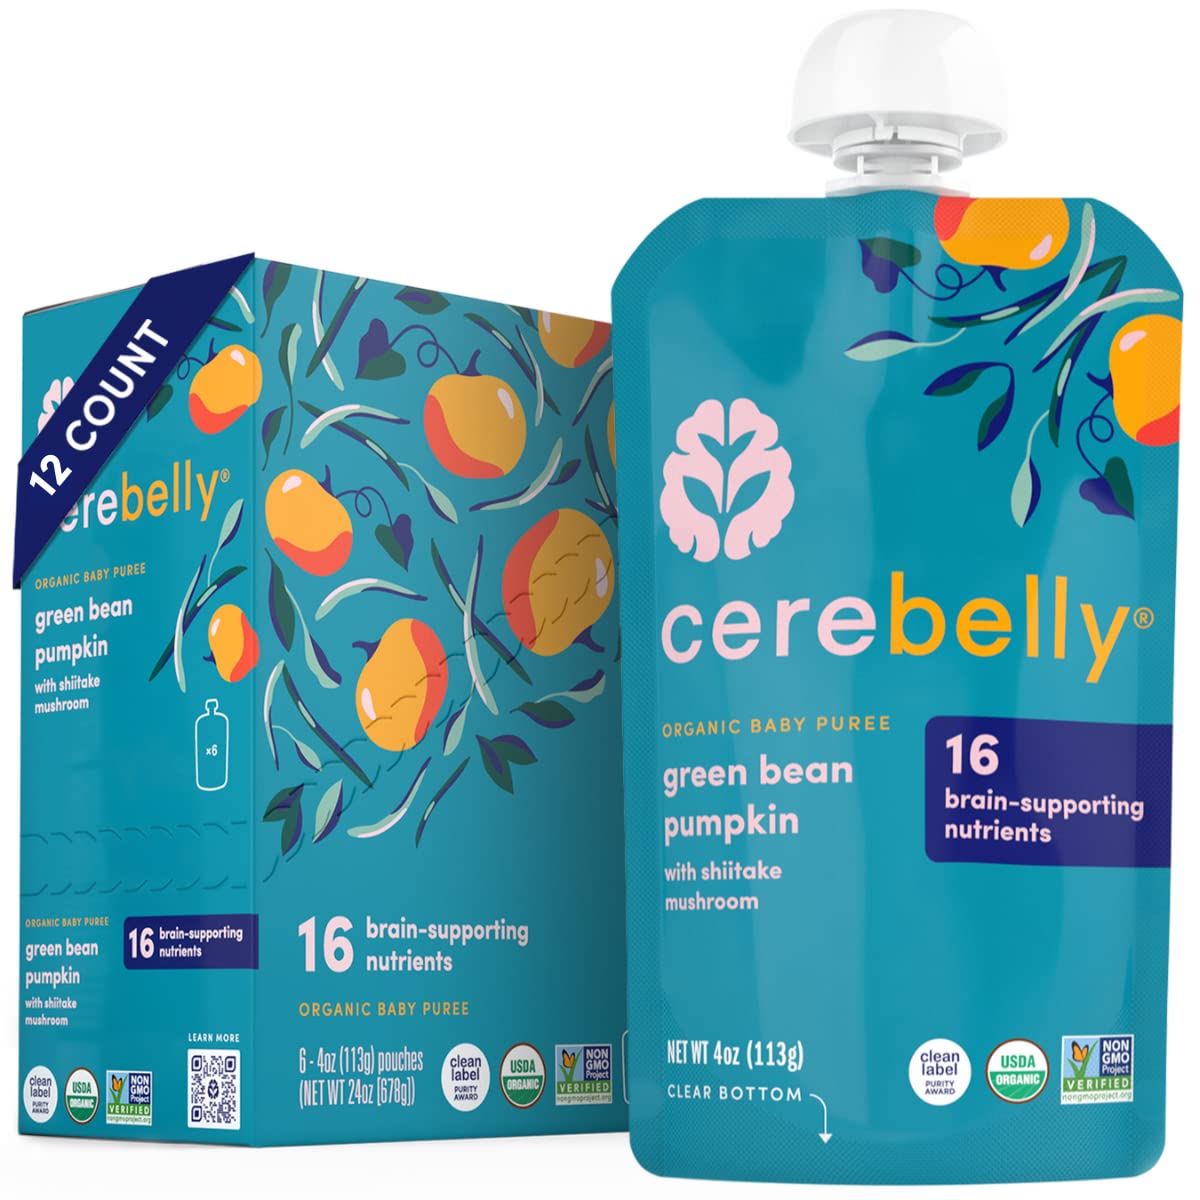 Cerebelly Baby Food Pouches – Organic Green Bean Pumpkin (4 oz, Pack of 12) - Toddler Snacks, 16 Brain-supporting Nutrients, Healthy Snacks, Made with Gluten-Free Ingredients, BPA-Free, No Added Sugar